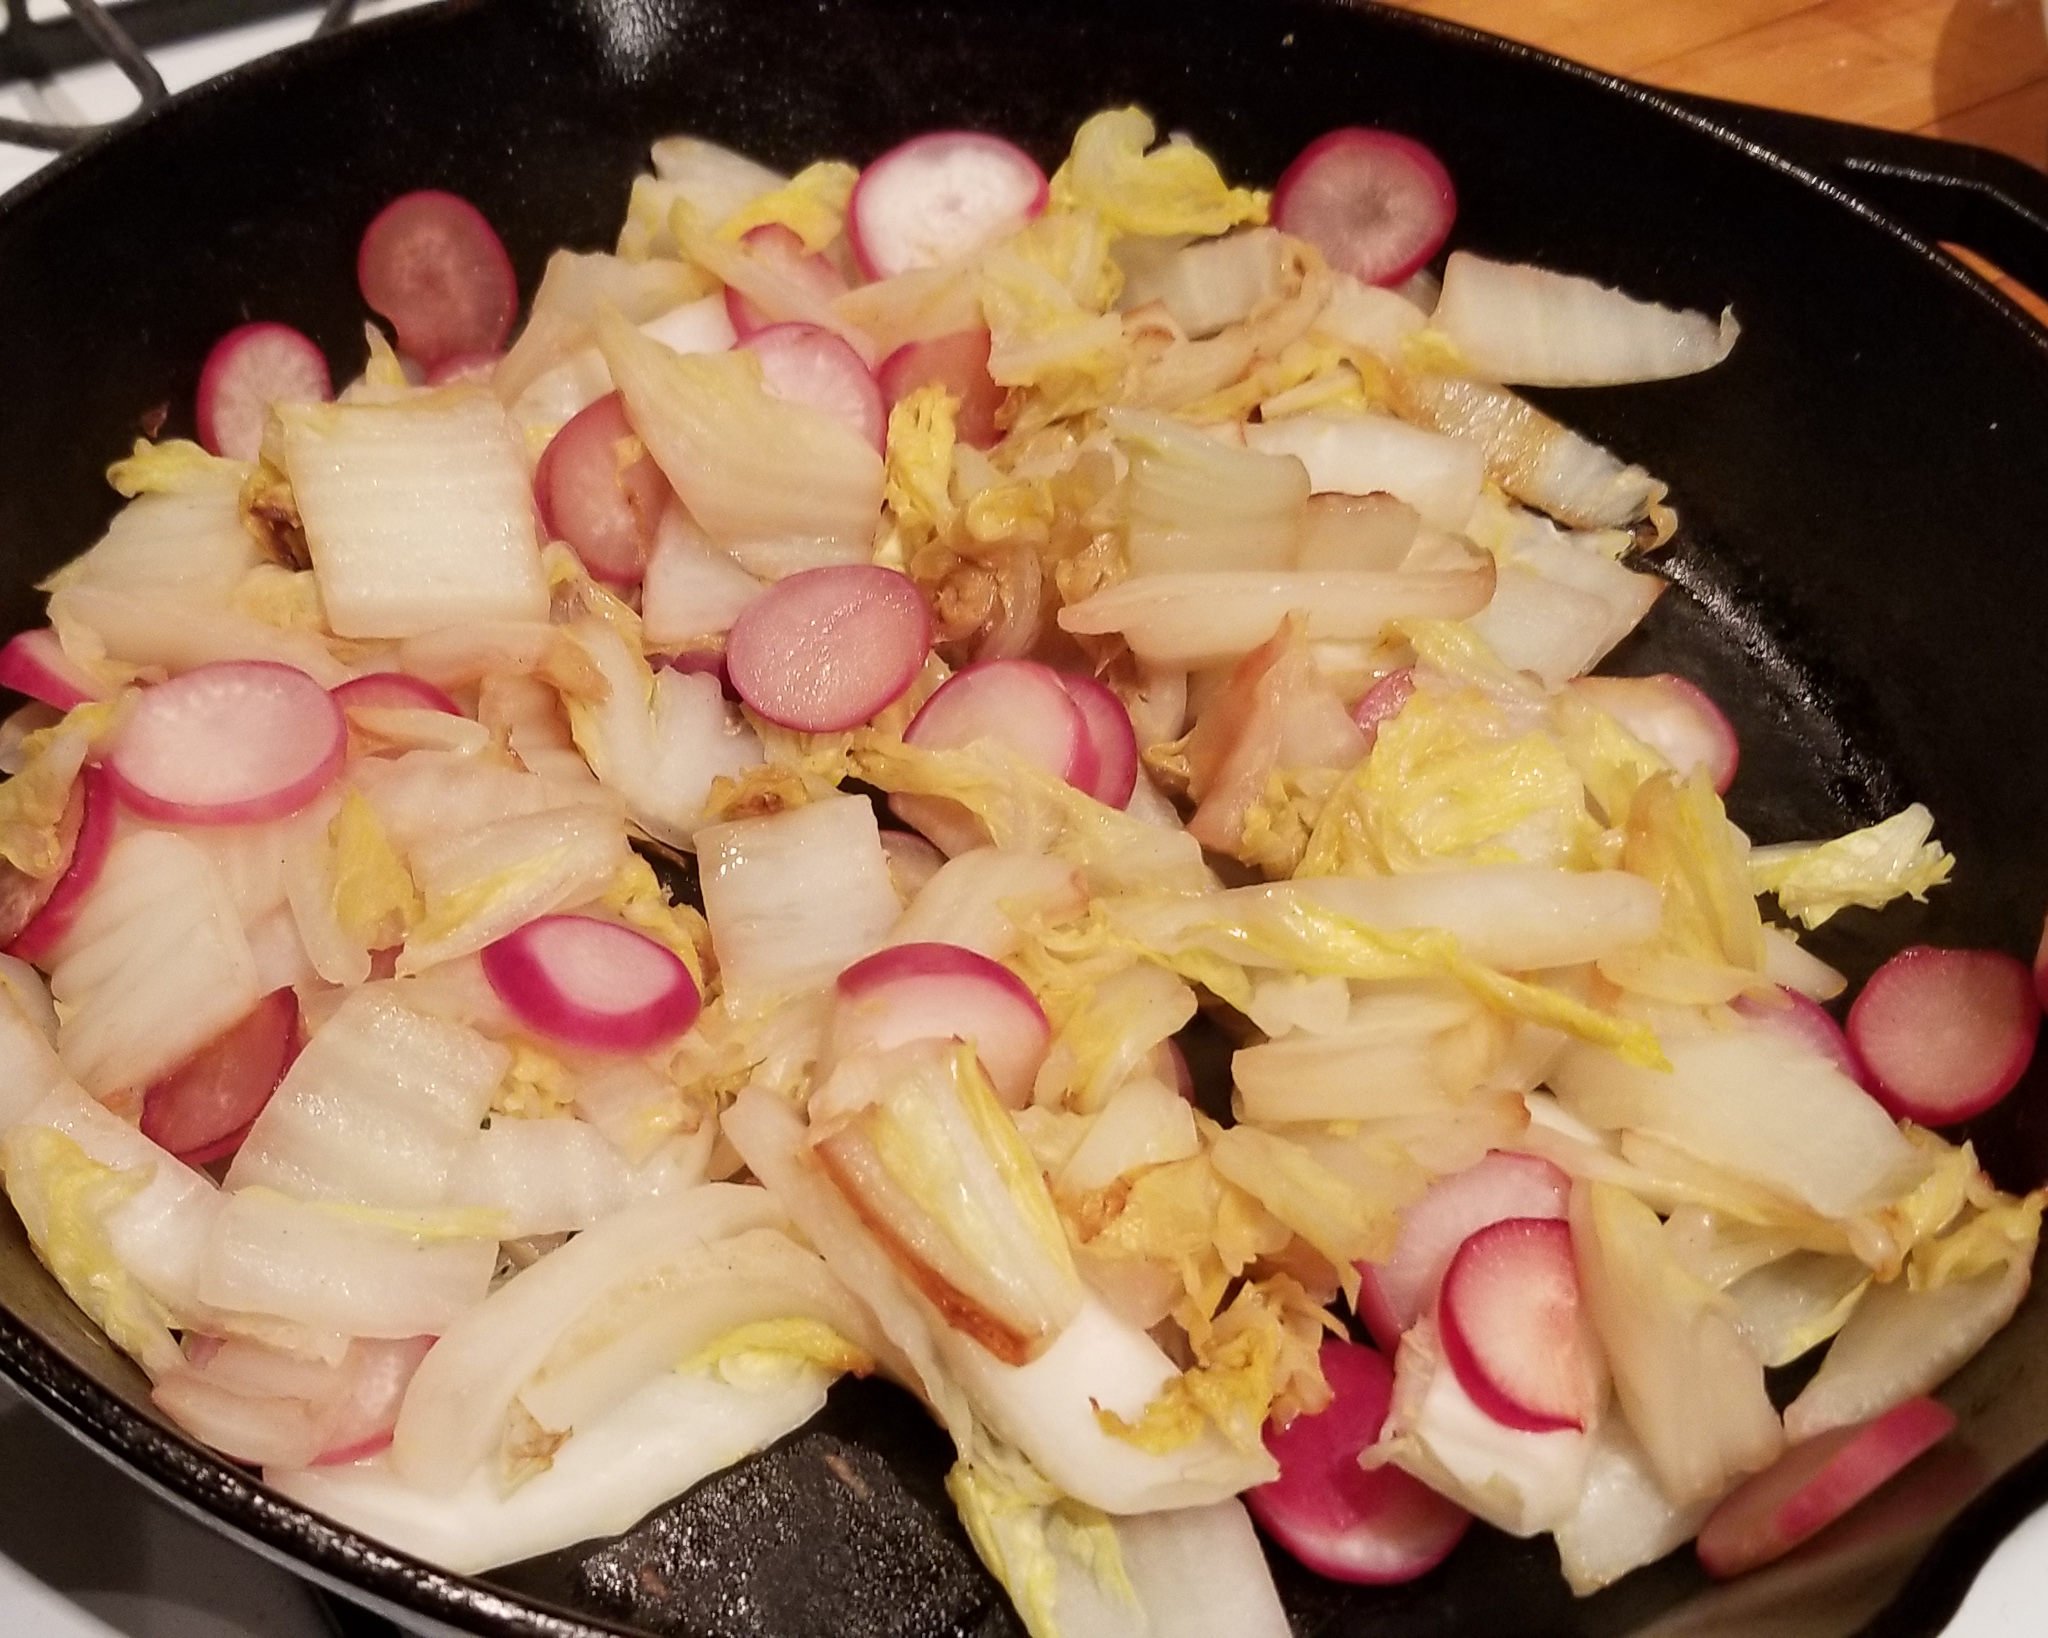 Turns out Radishes are Delicious cooked.